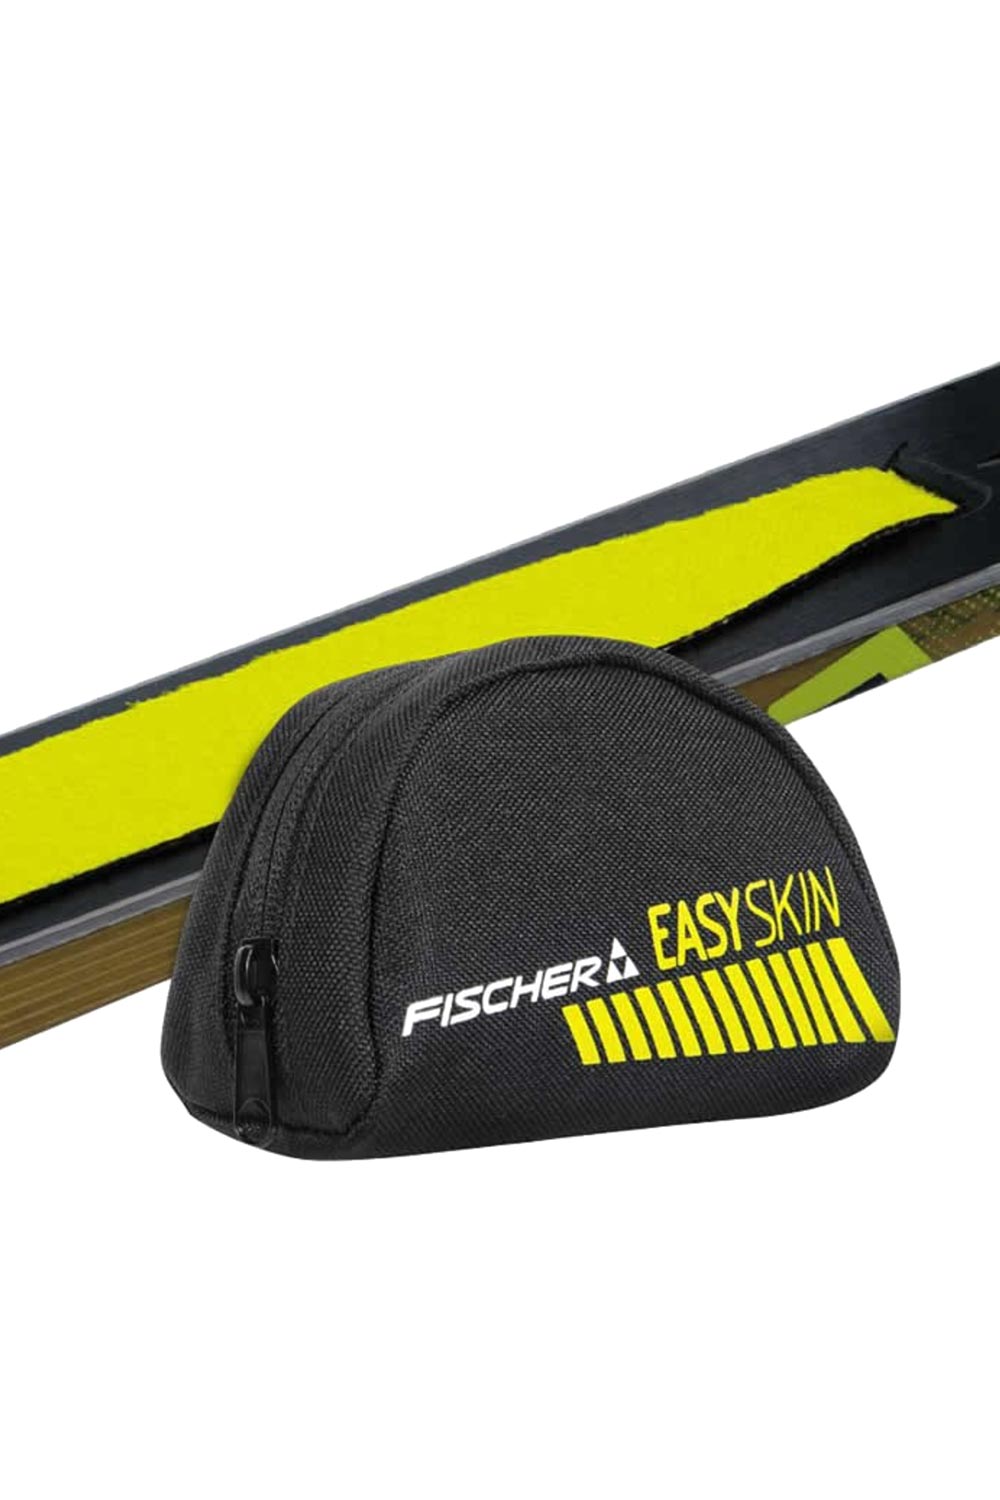 Fischer xc easy skin, climbing skins for nordic skiing